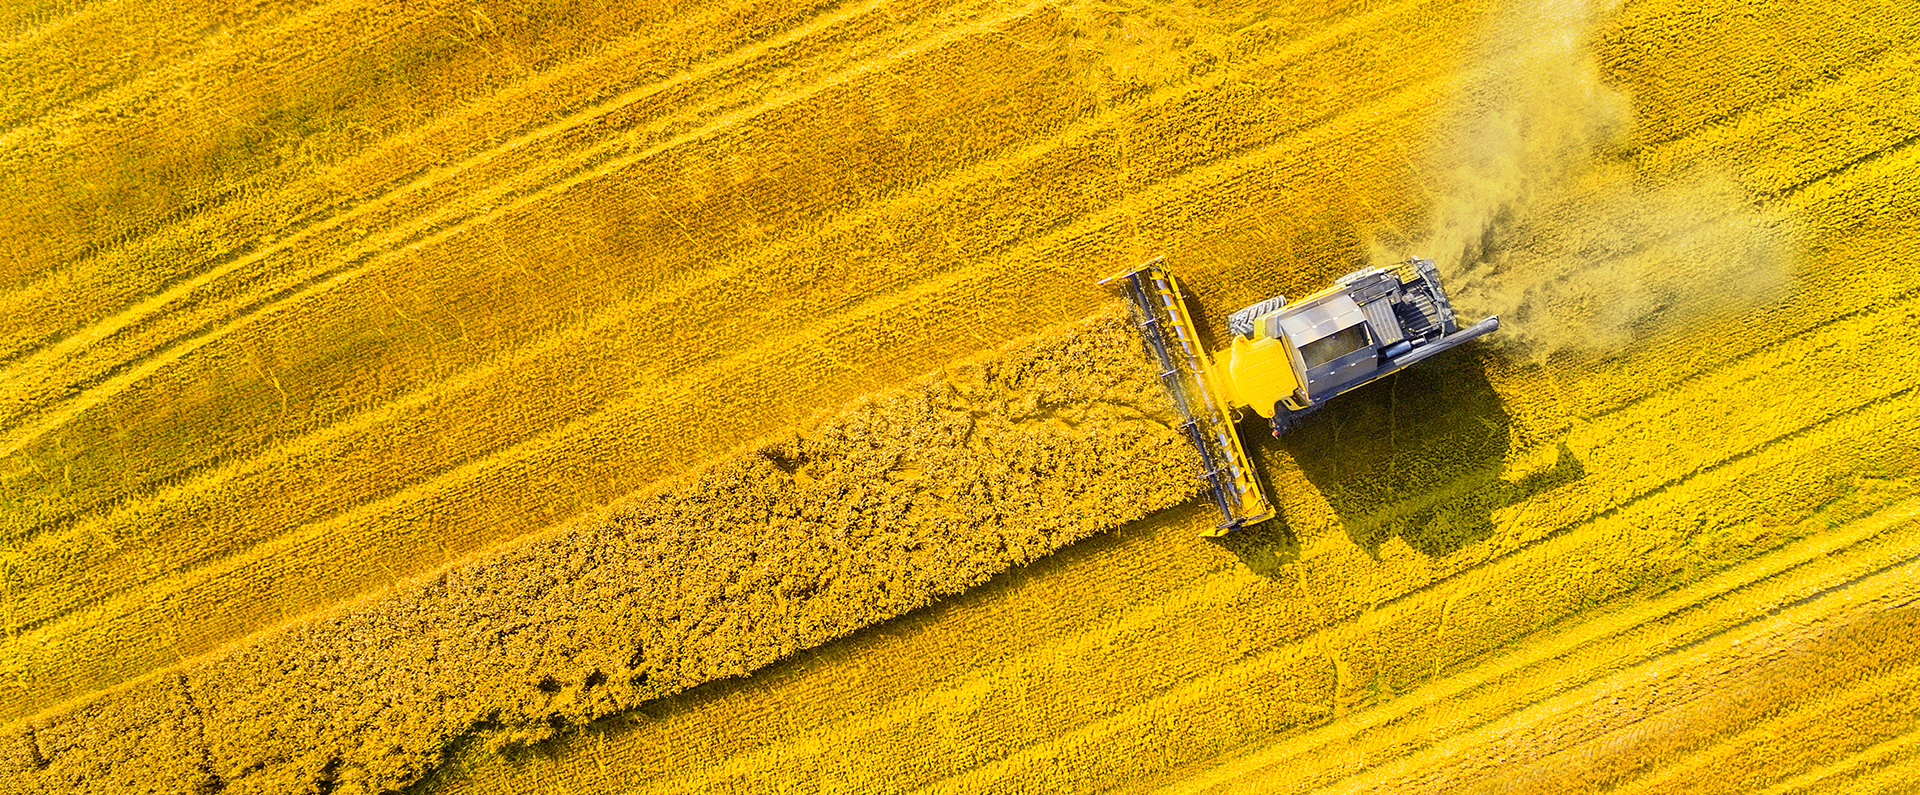 A tractor on a yellow field of canola with the text "Sustainability" 